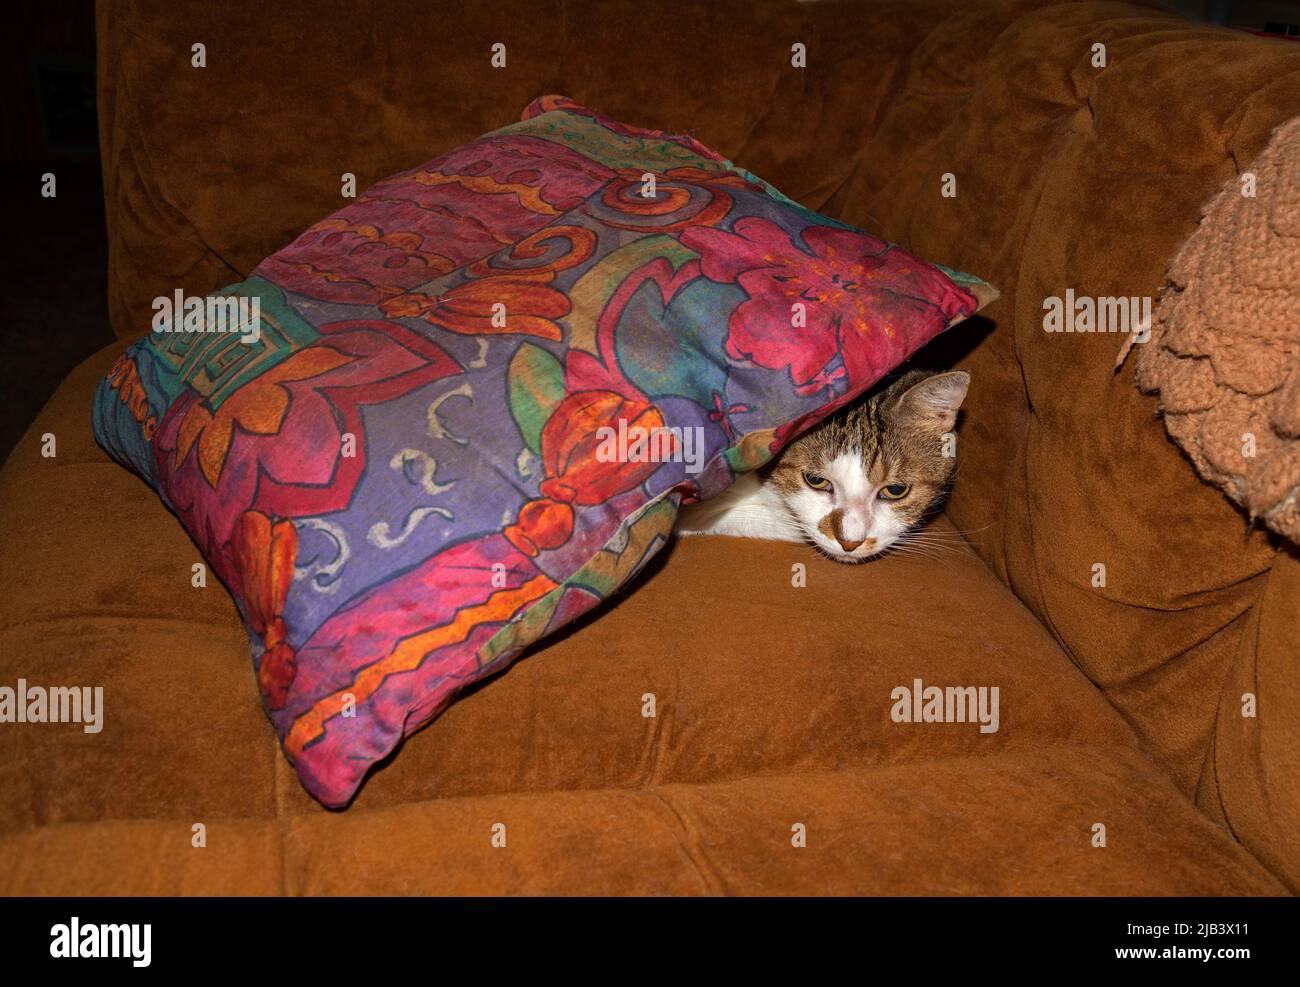 Family cat hides under it's favorite pillow on the couch to take a nap. Stock Photo